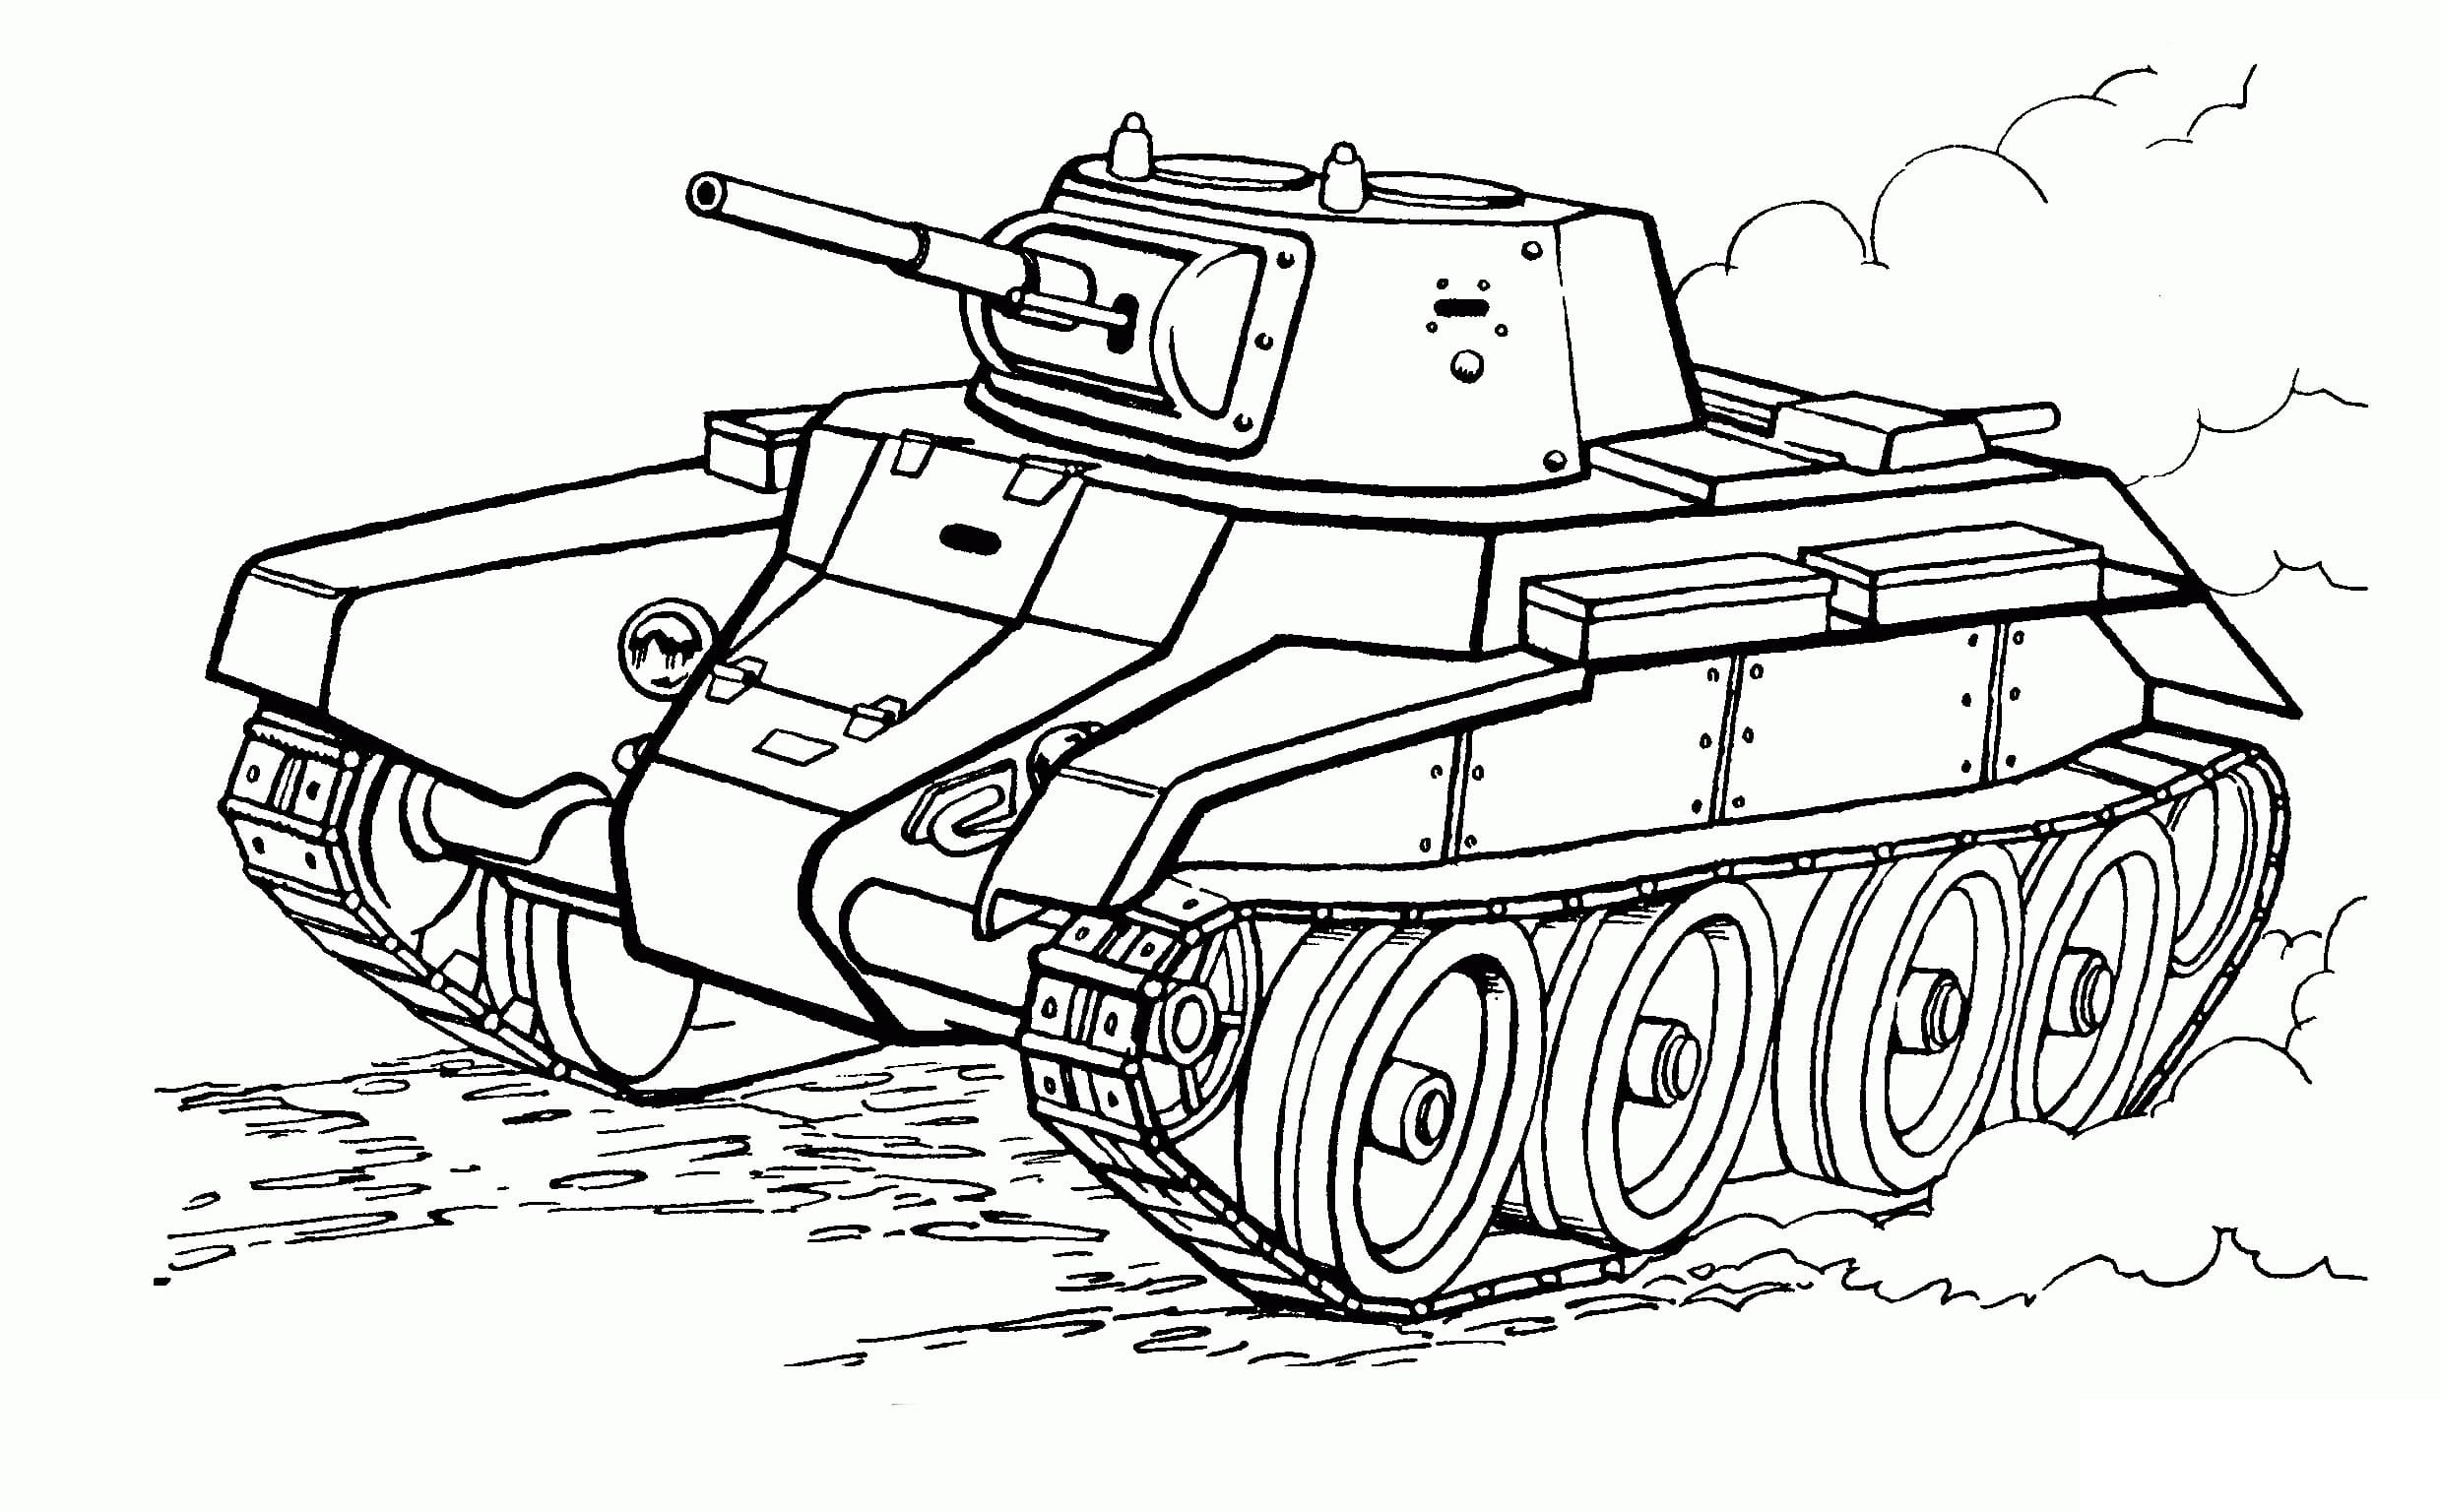 Creative coloring of tanks for children 4-5 years old